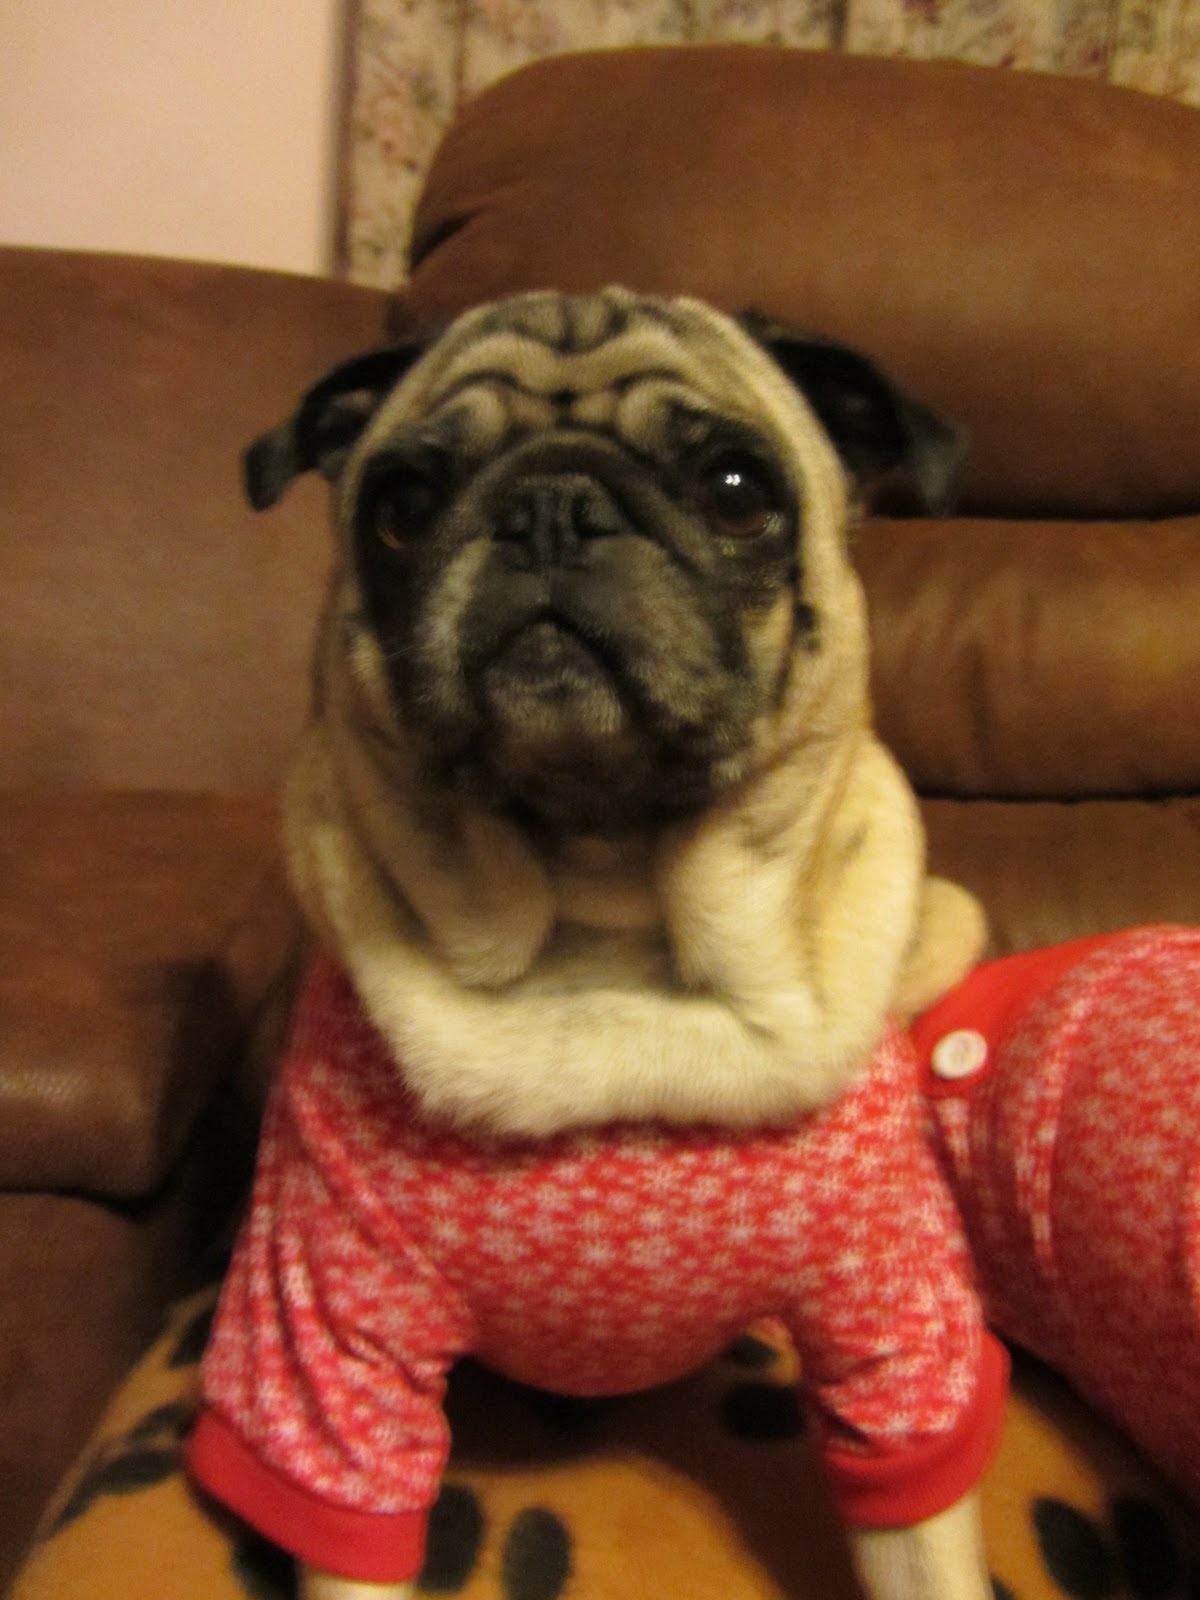 A Day in the Life of Pugs: New Christmas Pajamas